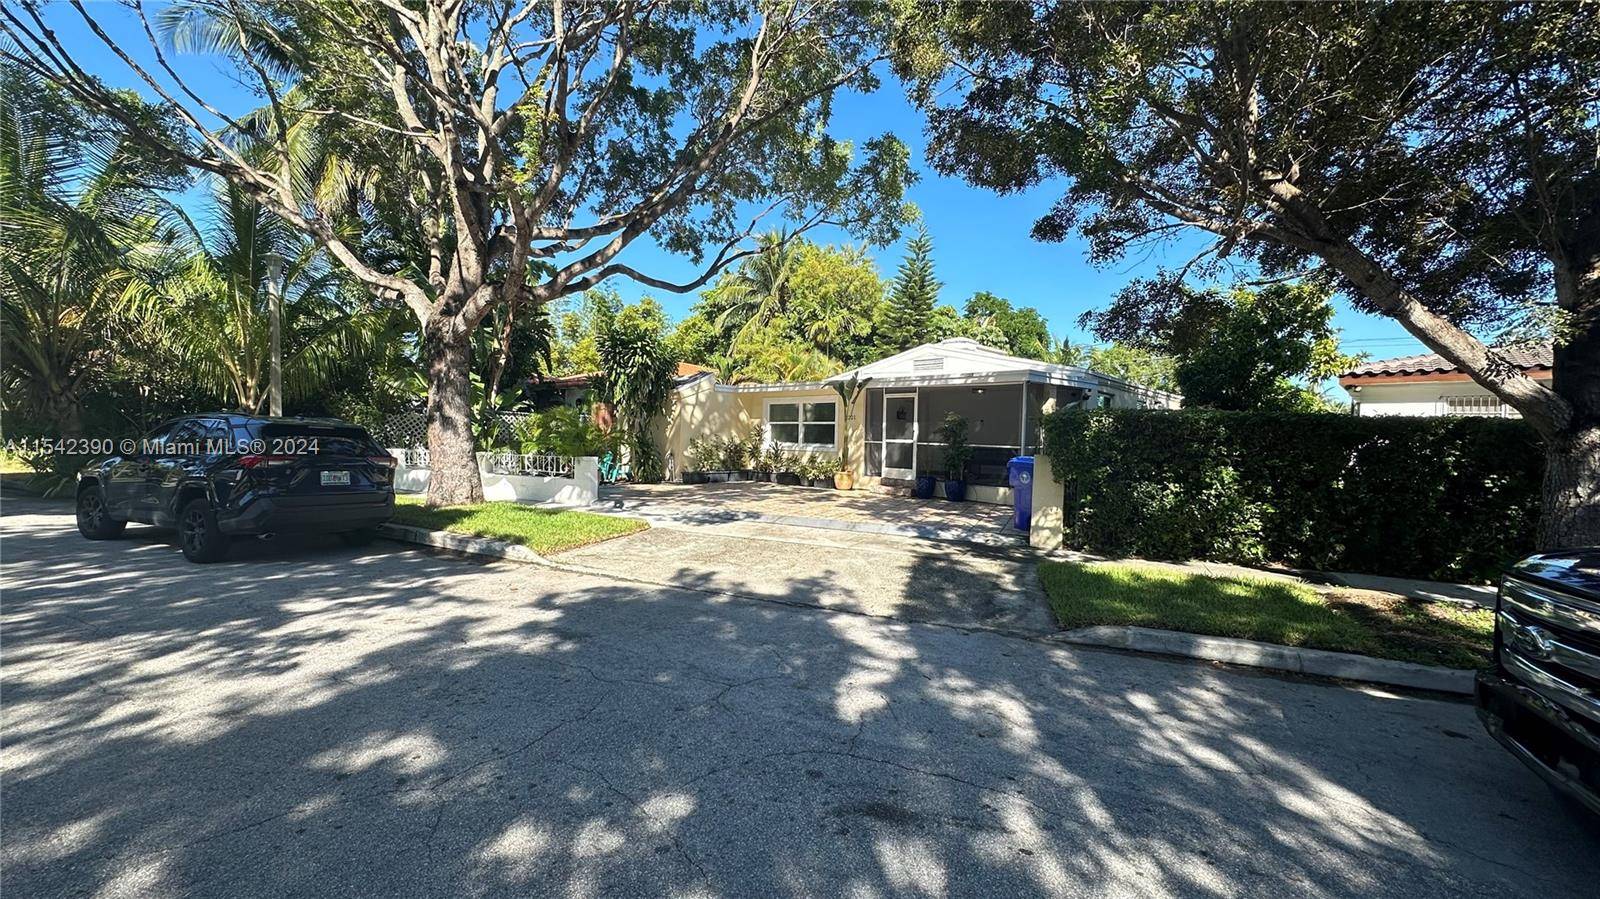 Discover a profitable Airbnb single family home in Coconut Grove with authentic hardwood pine floors, a new roof, air conditioning, and a tankless water heater.